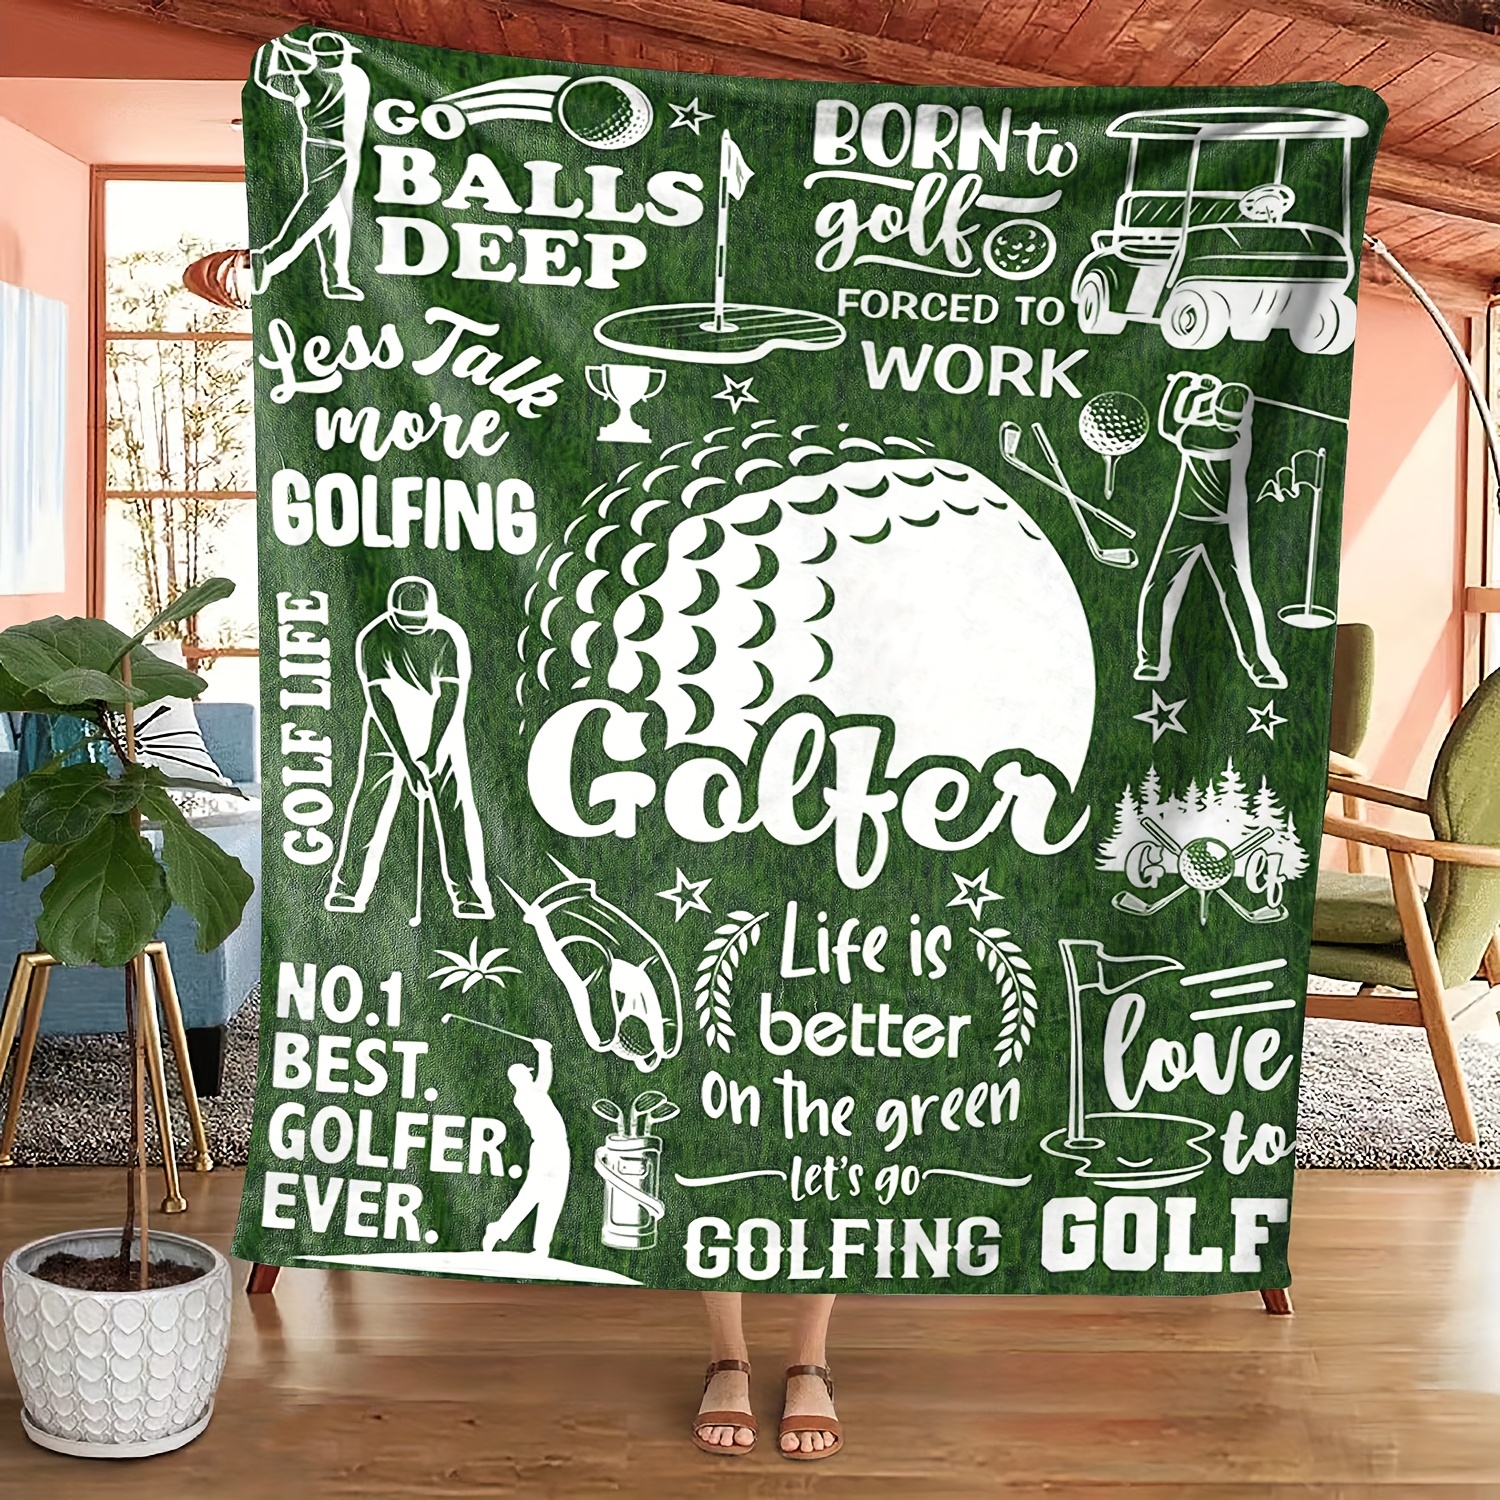 

Golfer Themed Knitted Polyester Throw Blanket - All-season Style With Creative Typography And Golf Motifs - Soft Fleece Flannel For Golfing Enthusiasts